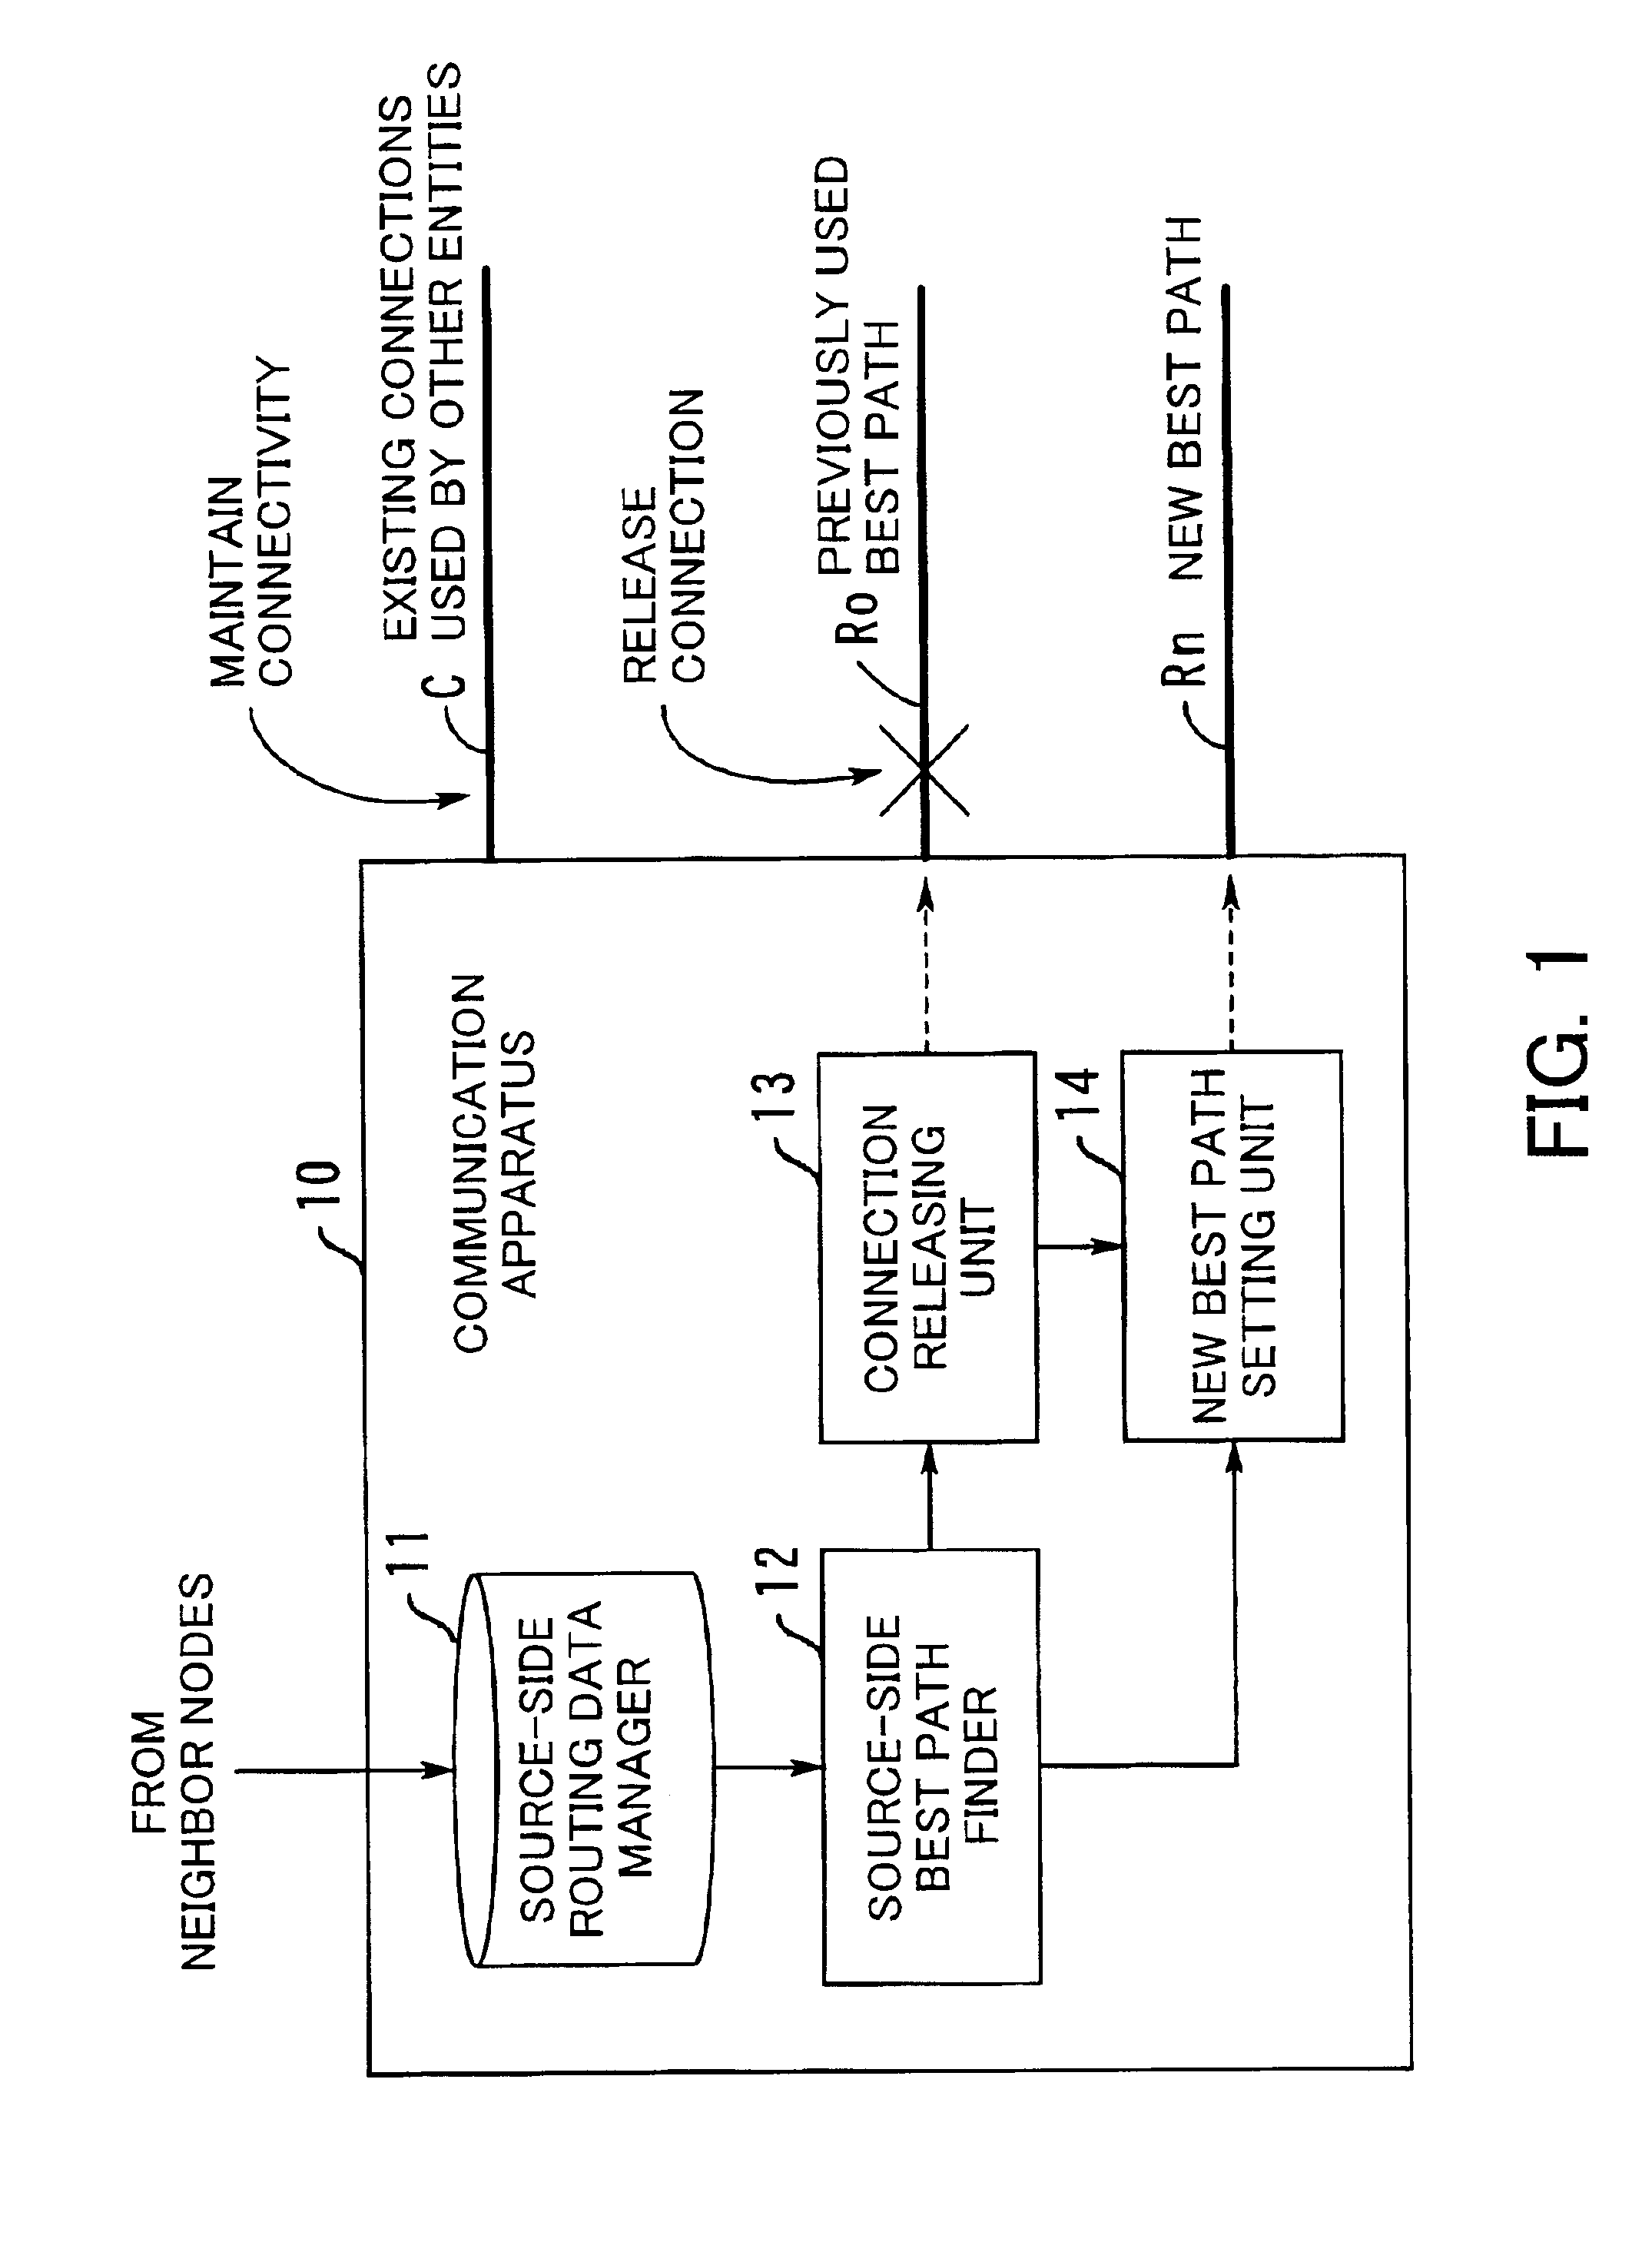 Communication apparatus with selective route optimization capabilities